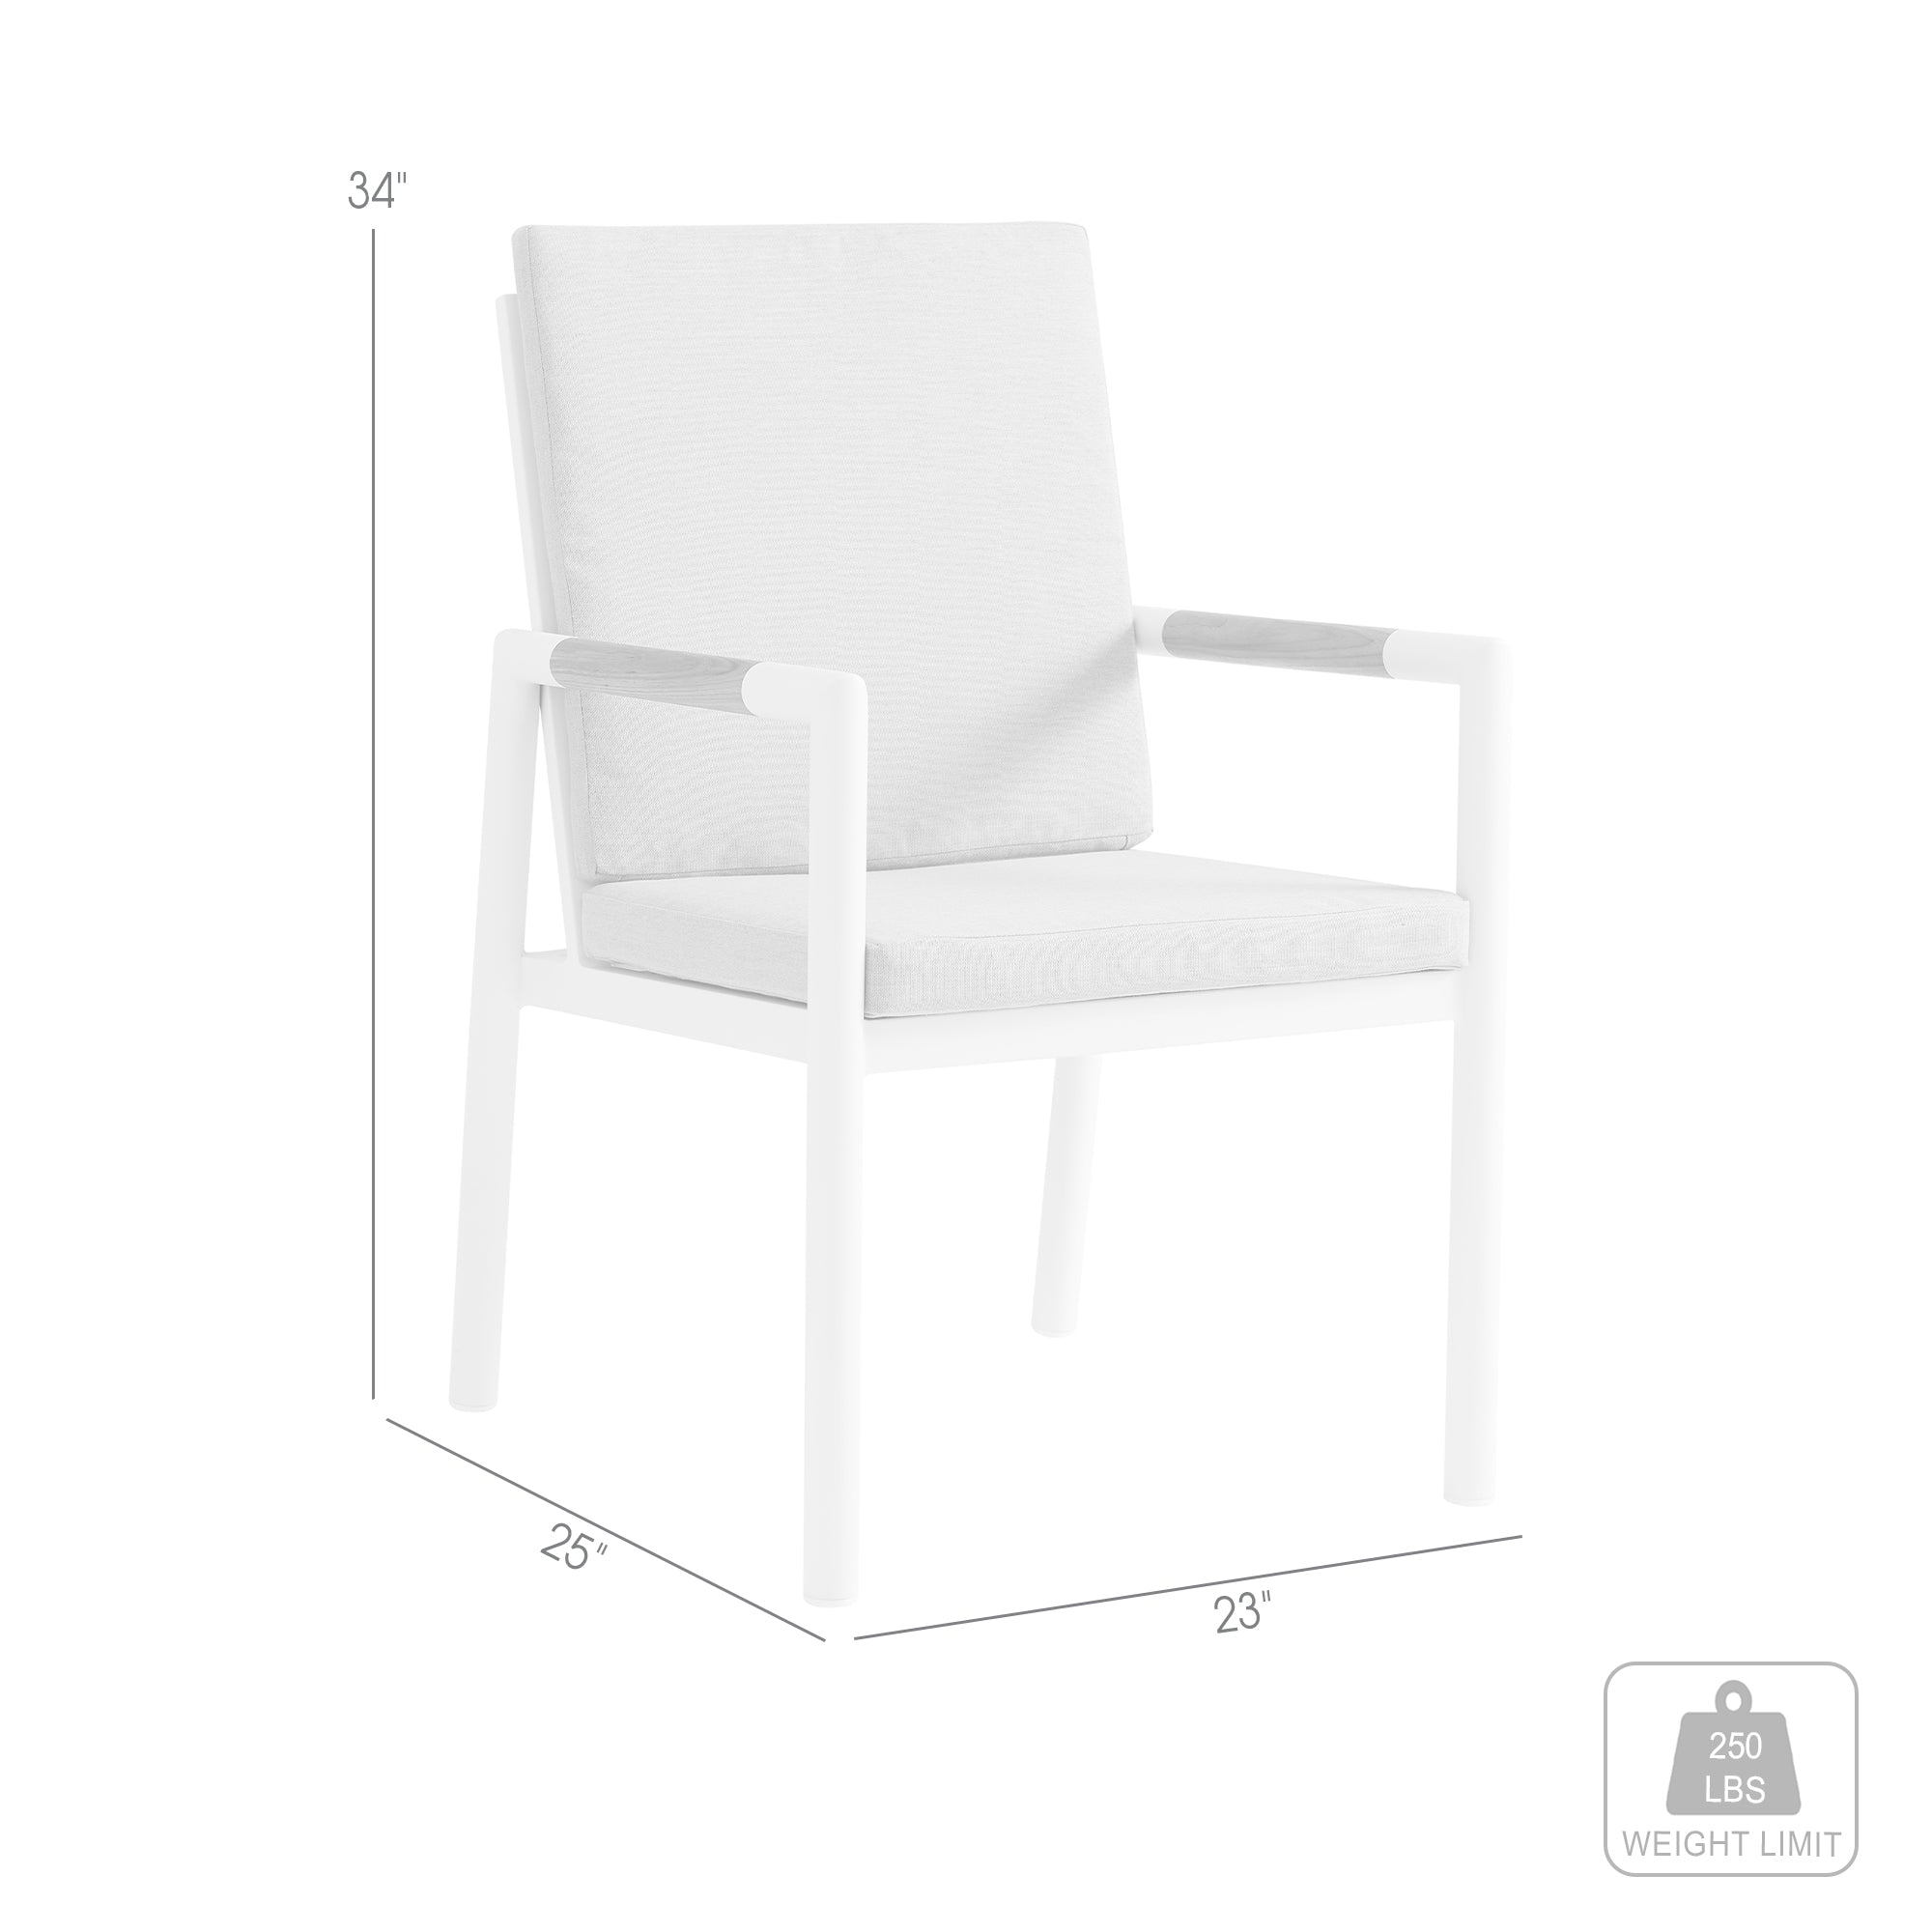 Armen Living - Royal White Aluminum and Teak Outdoor Dining Chair with Light Gray Fabric - Set of 2 - 840254332799